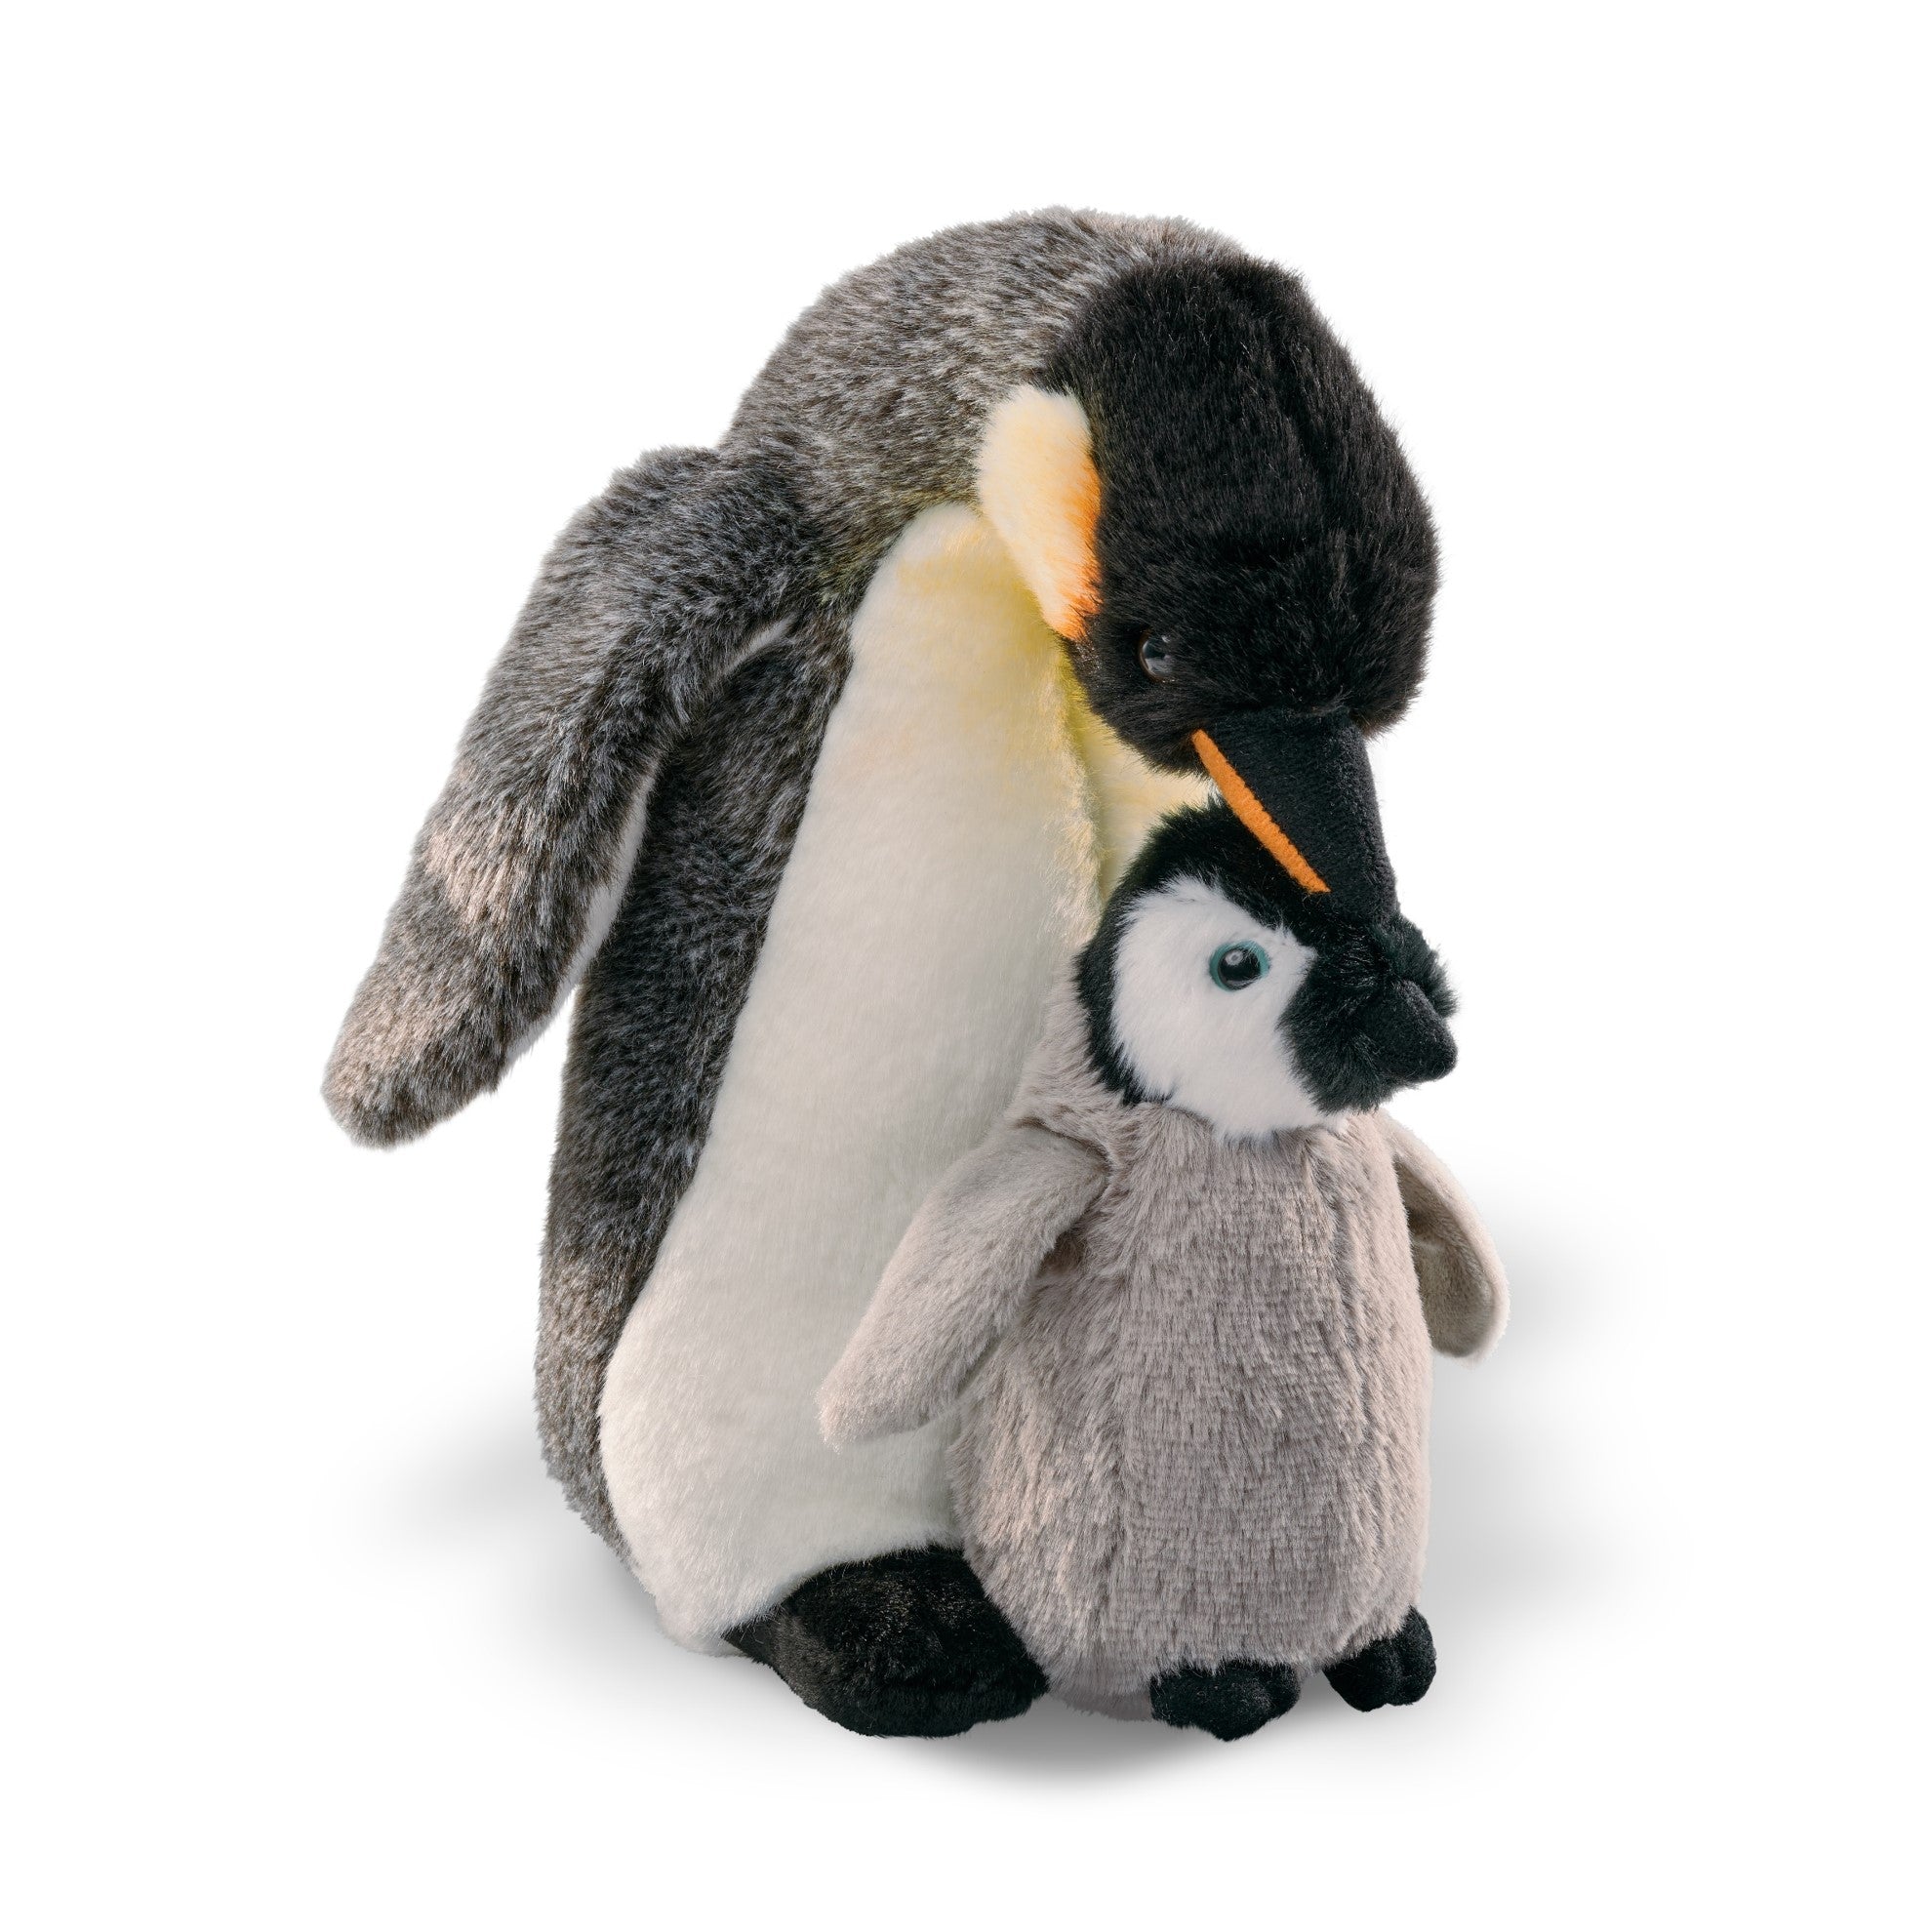 A photo of the emperor penguin family plush toy, including an adult penguin and baby penguin